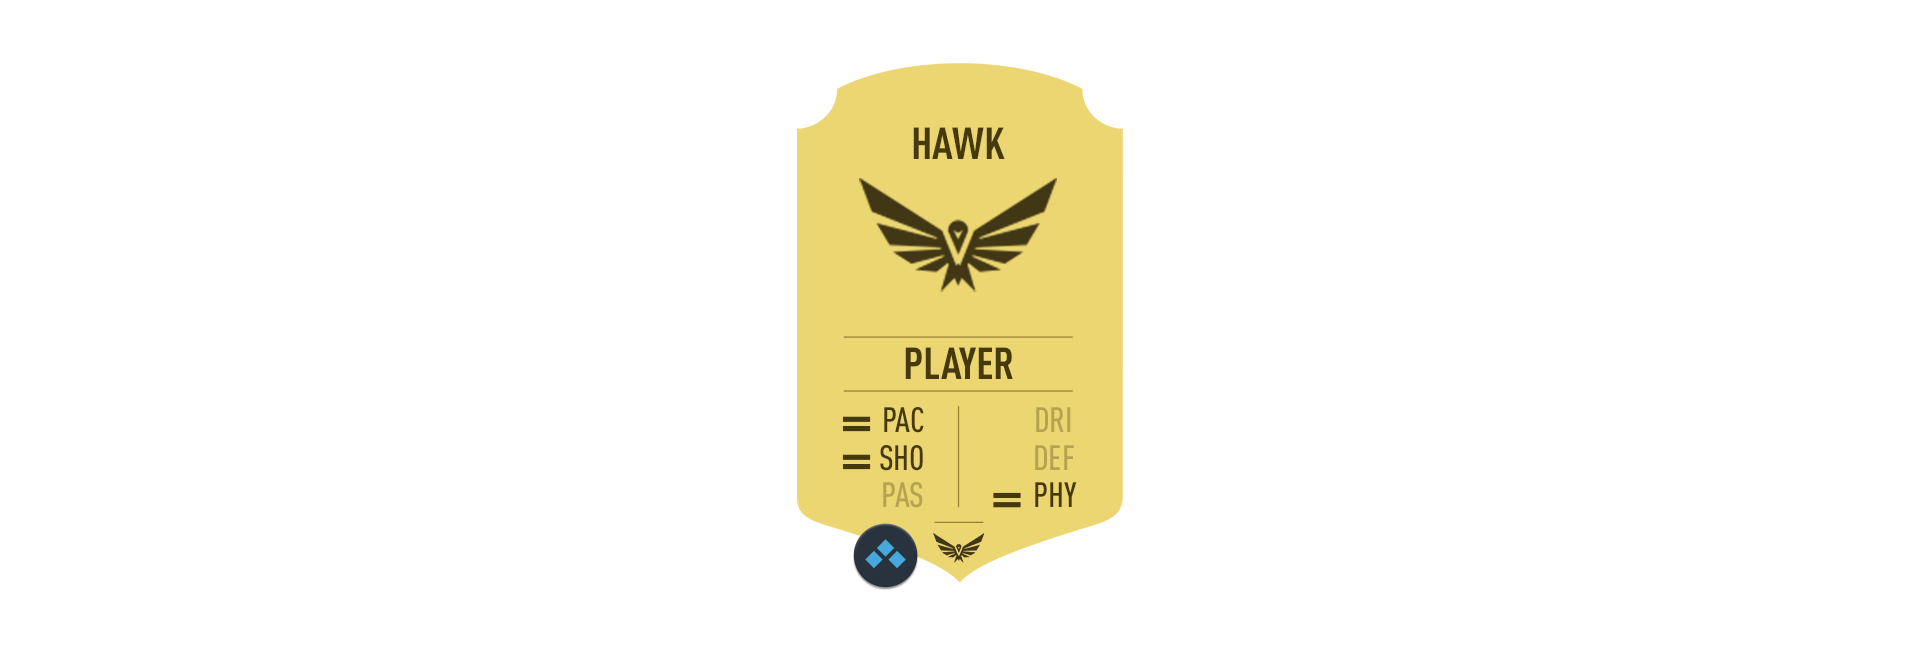 32 image of chem style view of a player with hawk at 3 chemistry.png.adapt.1920w